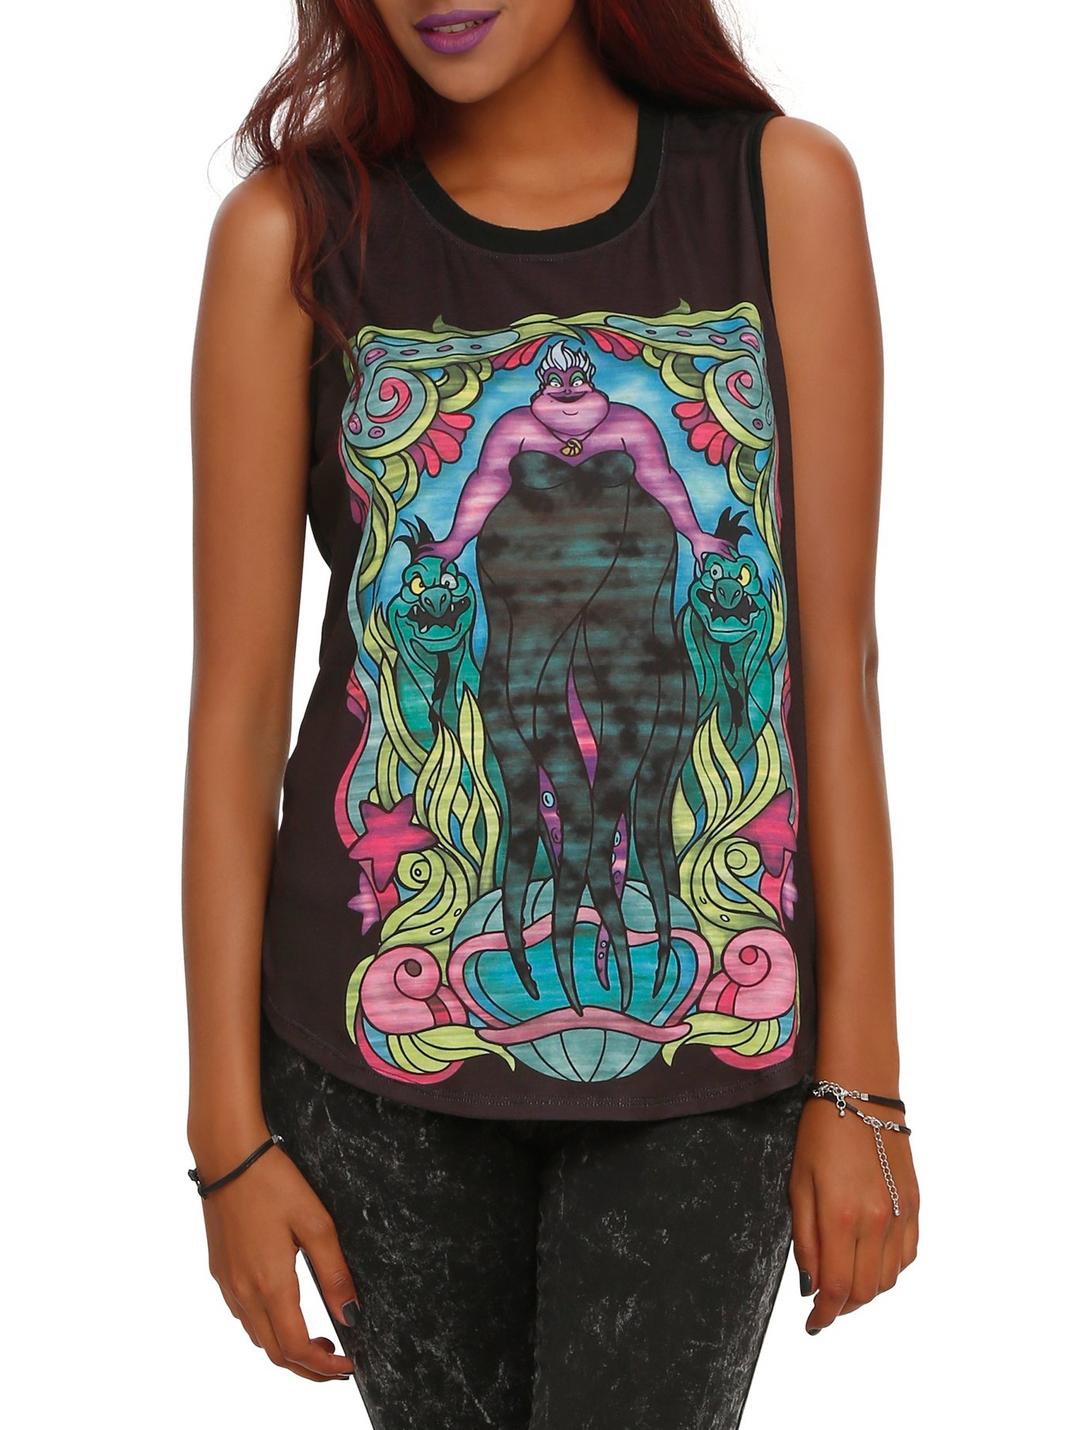 Disney The Little Mermaid Ursula Stained Glass Girls Muscle Top, BLACK, hi-res